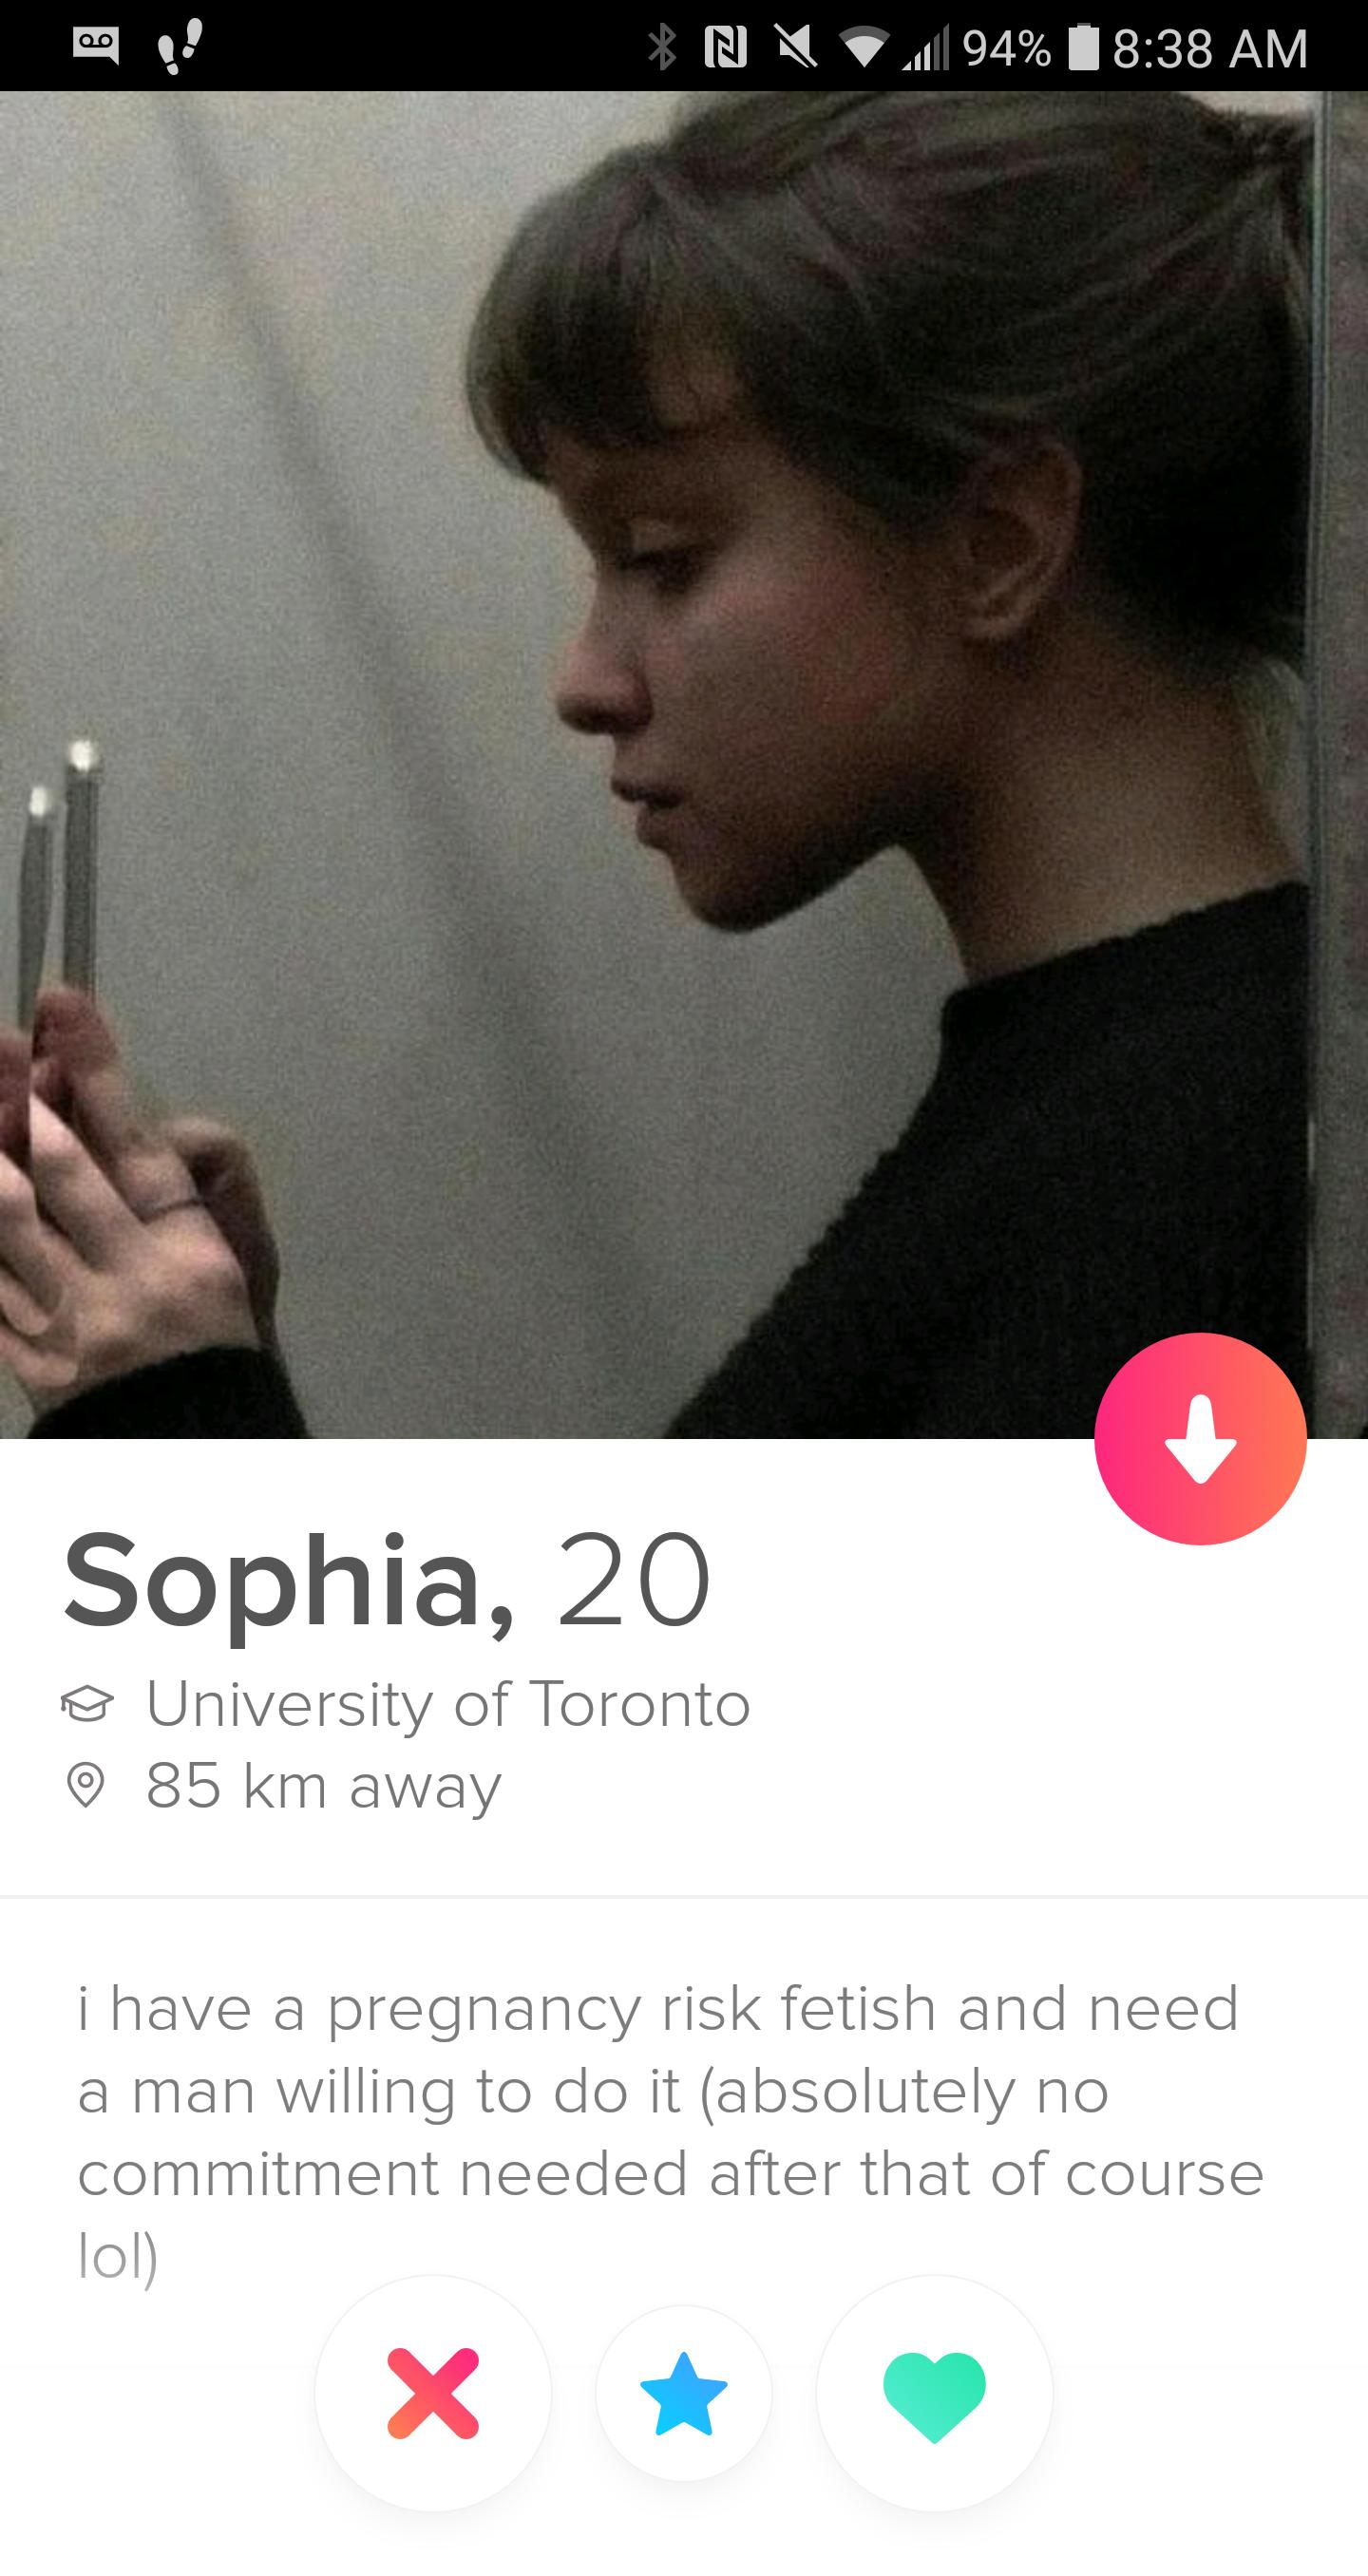 university of toronto memes - Qo Nv 94% Sophia, 20 University of Toronto 85 km away i have a pregnancy risk fetish and need a man willing to do it absolutely no commitment needed after that of course lol